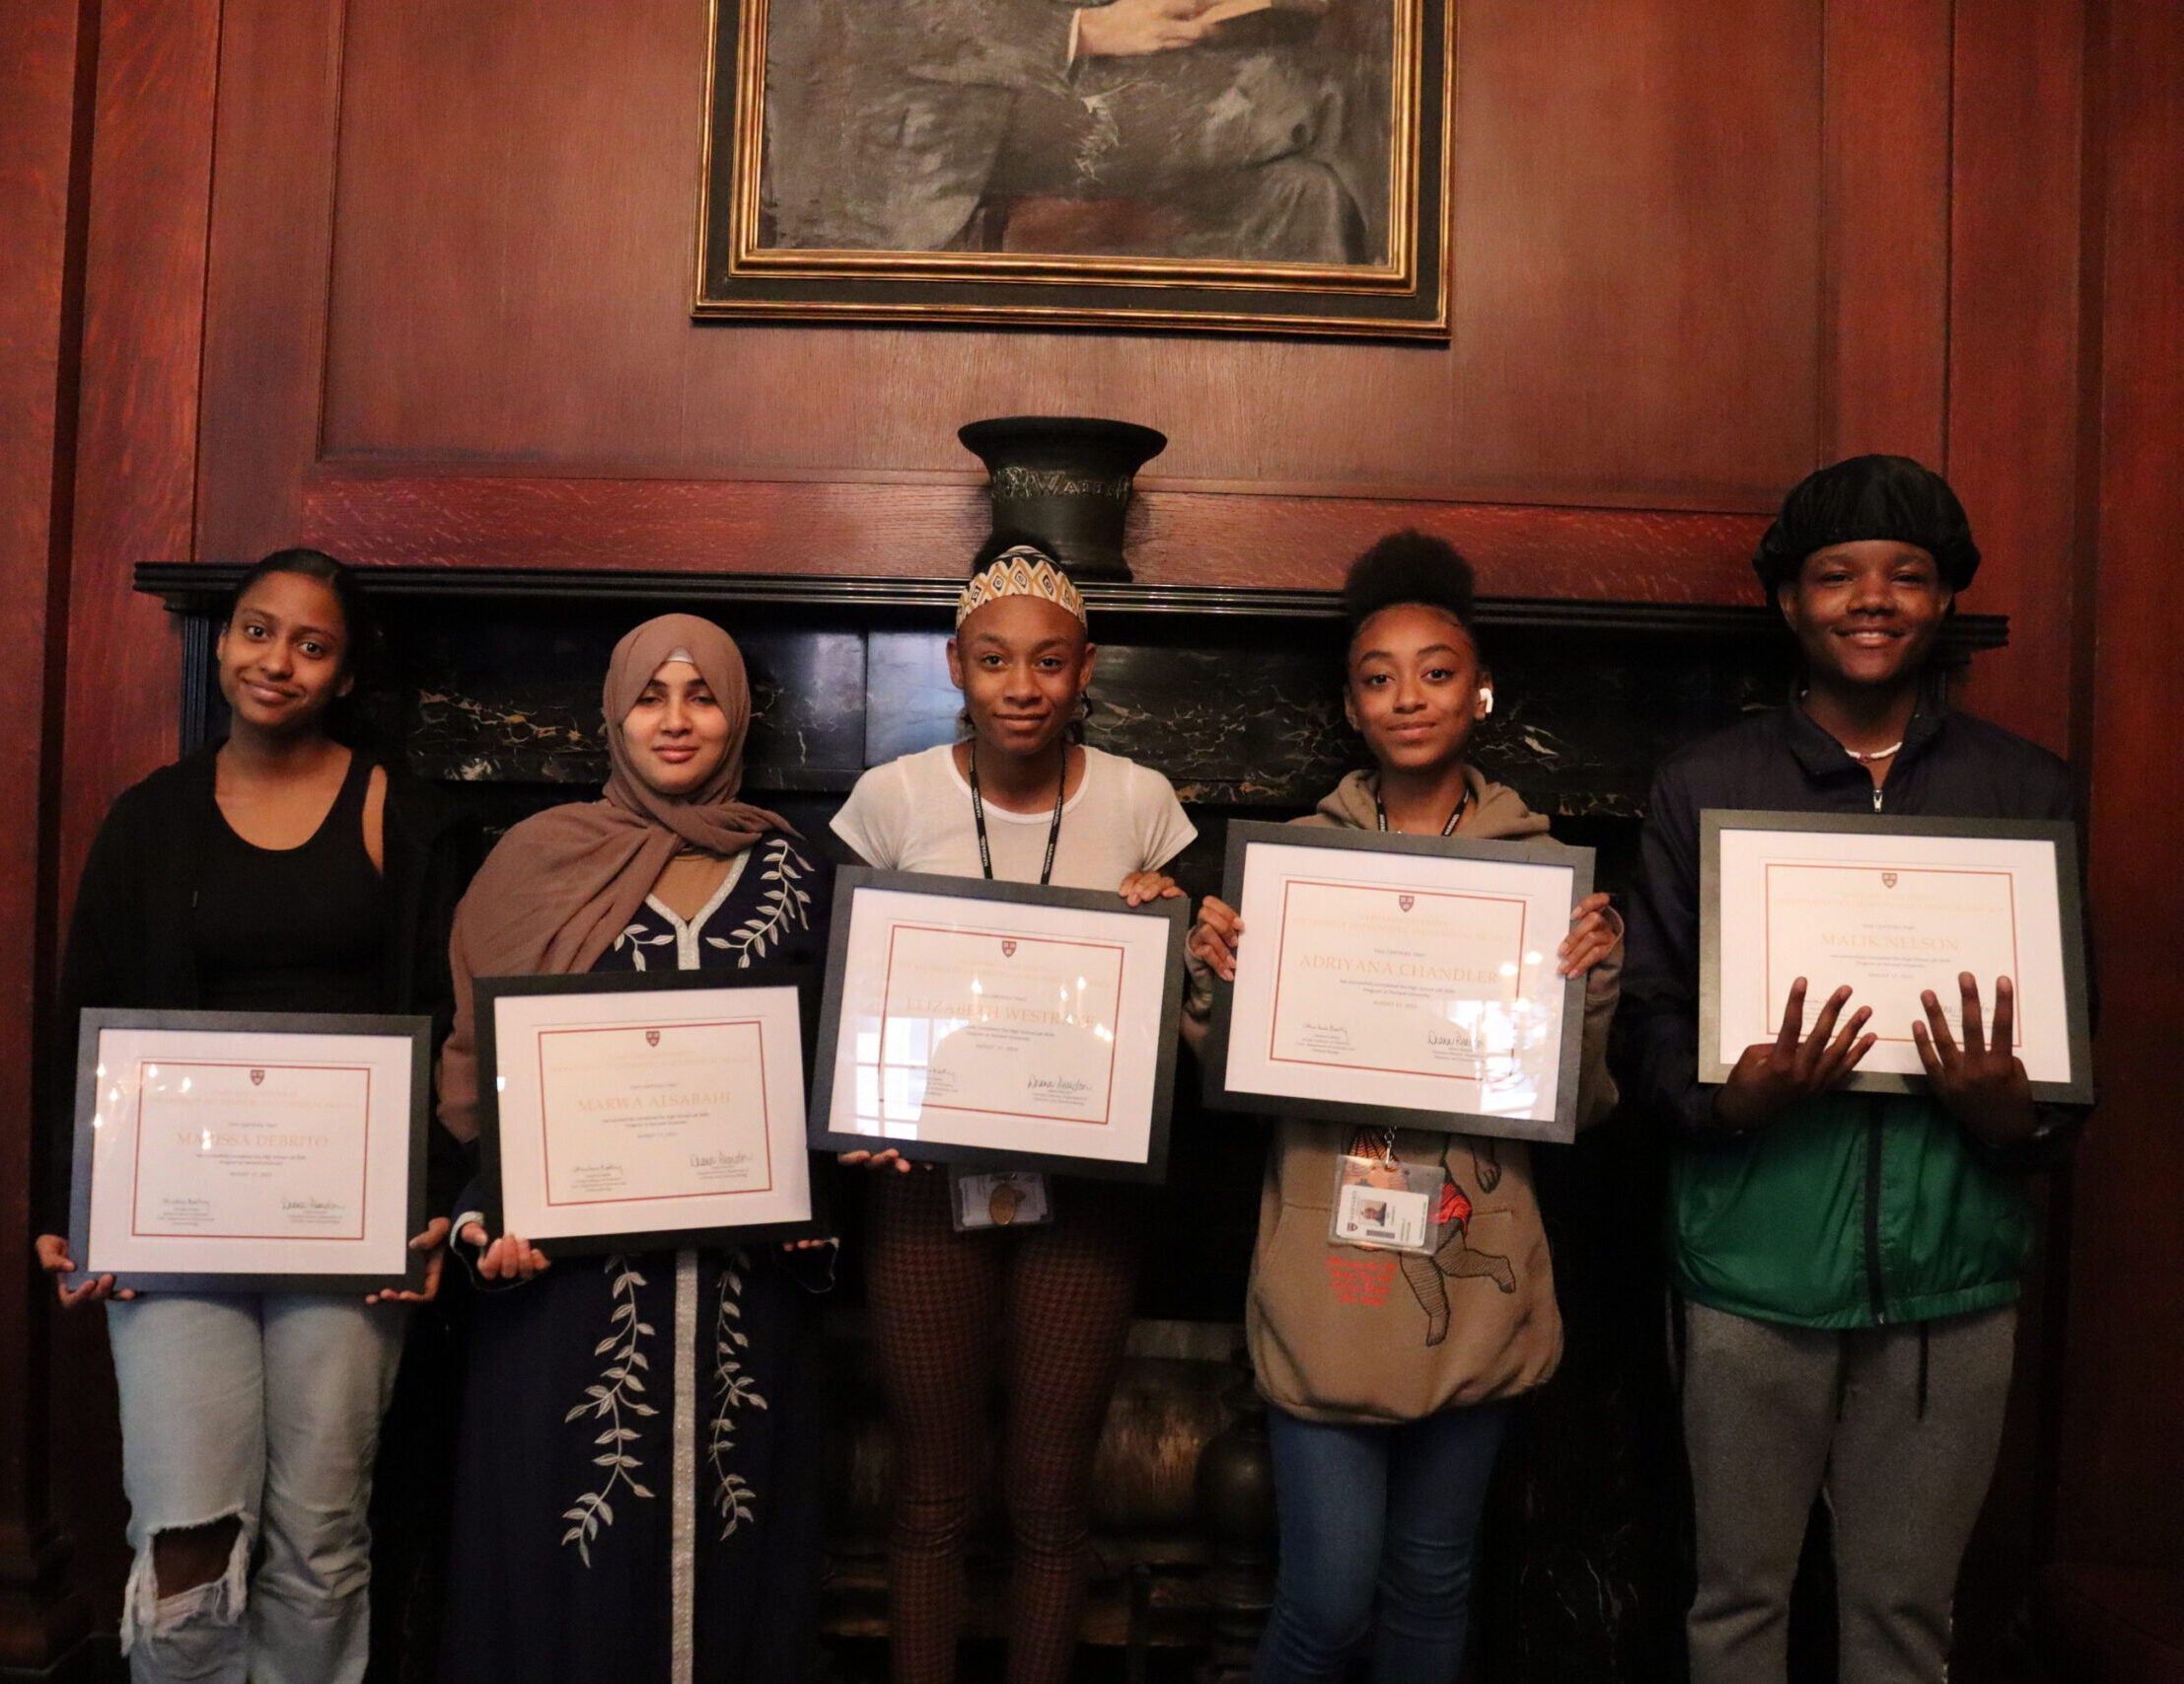 Brighton High School students Marissa Debrito, Marwa Alsabahi, Elizabeth West Raye, Adriyana Chandler, and Malik Nelson hold their certificates of completion in front of a fireplace for the 2nd annual CCB High School Lab Skills summer internship program.